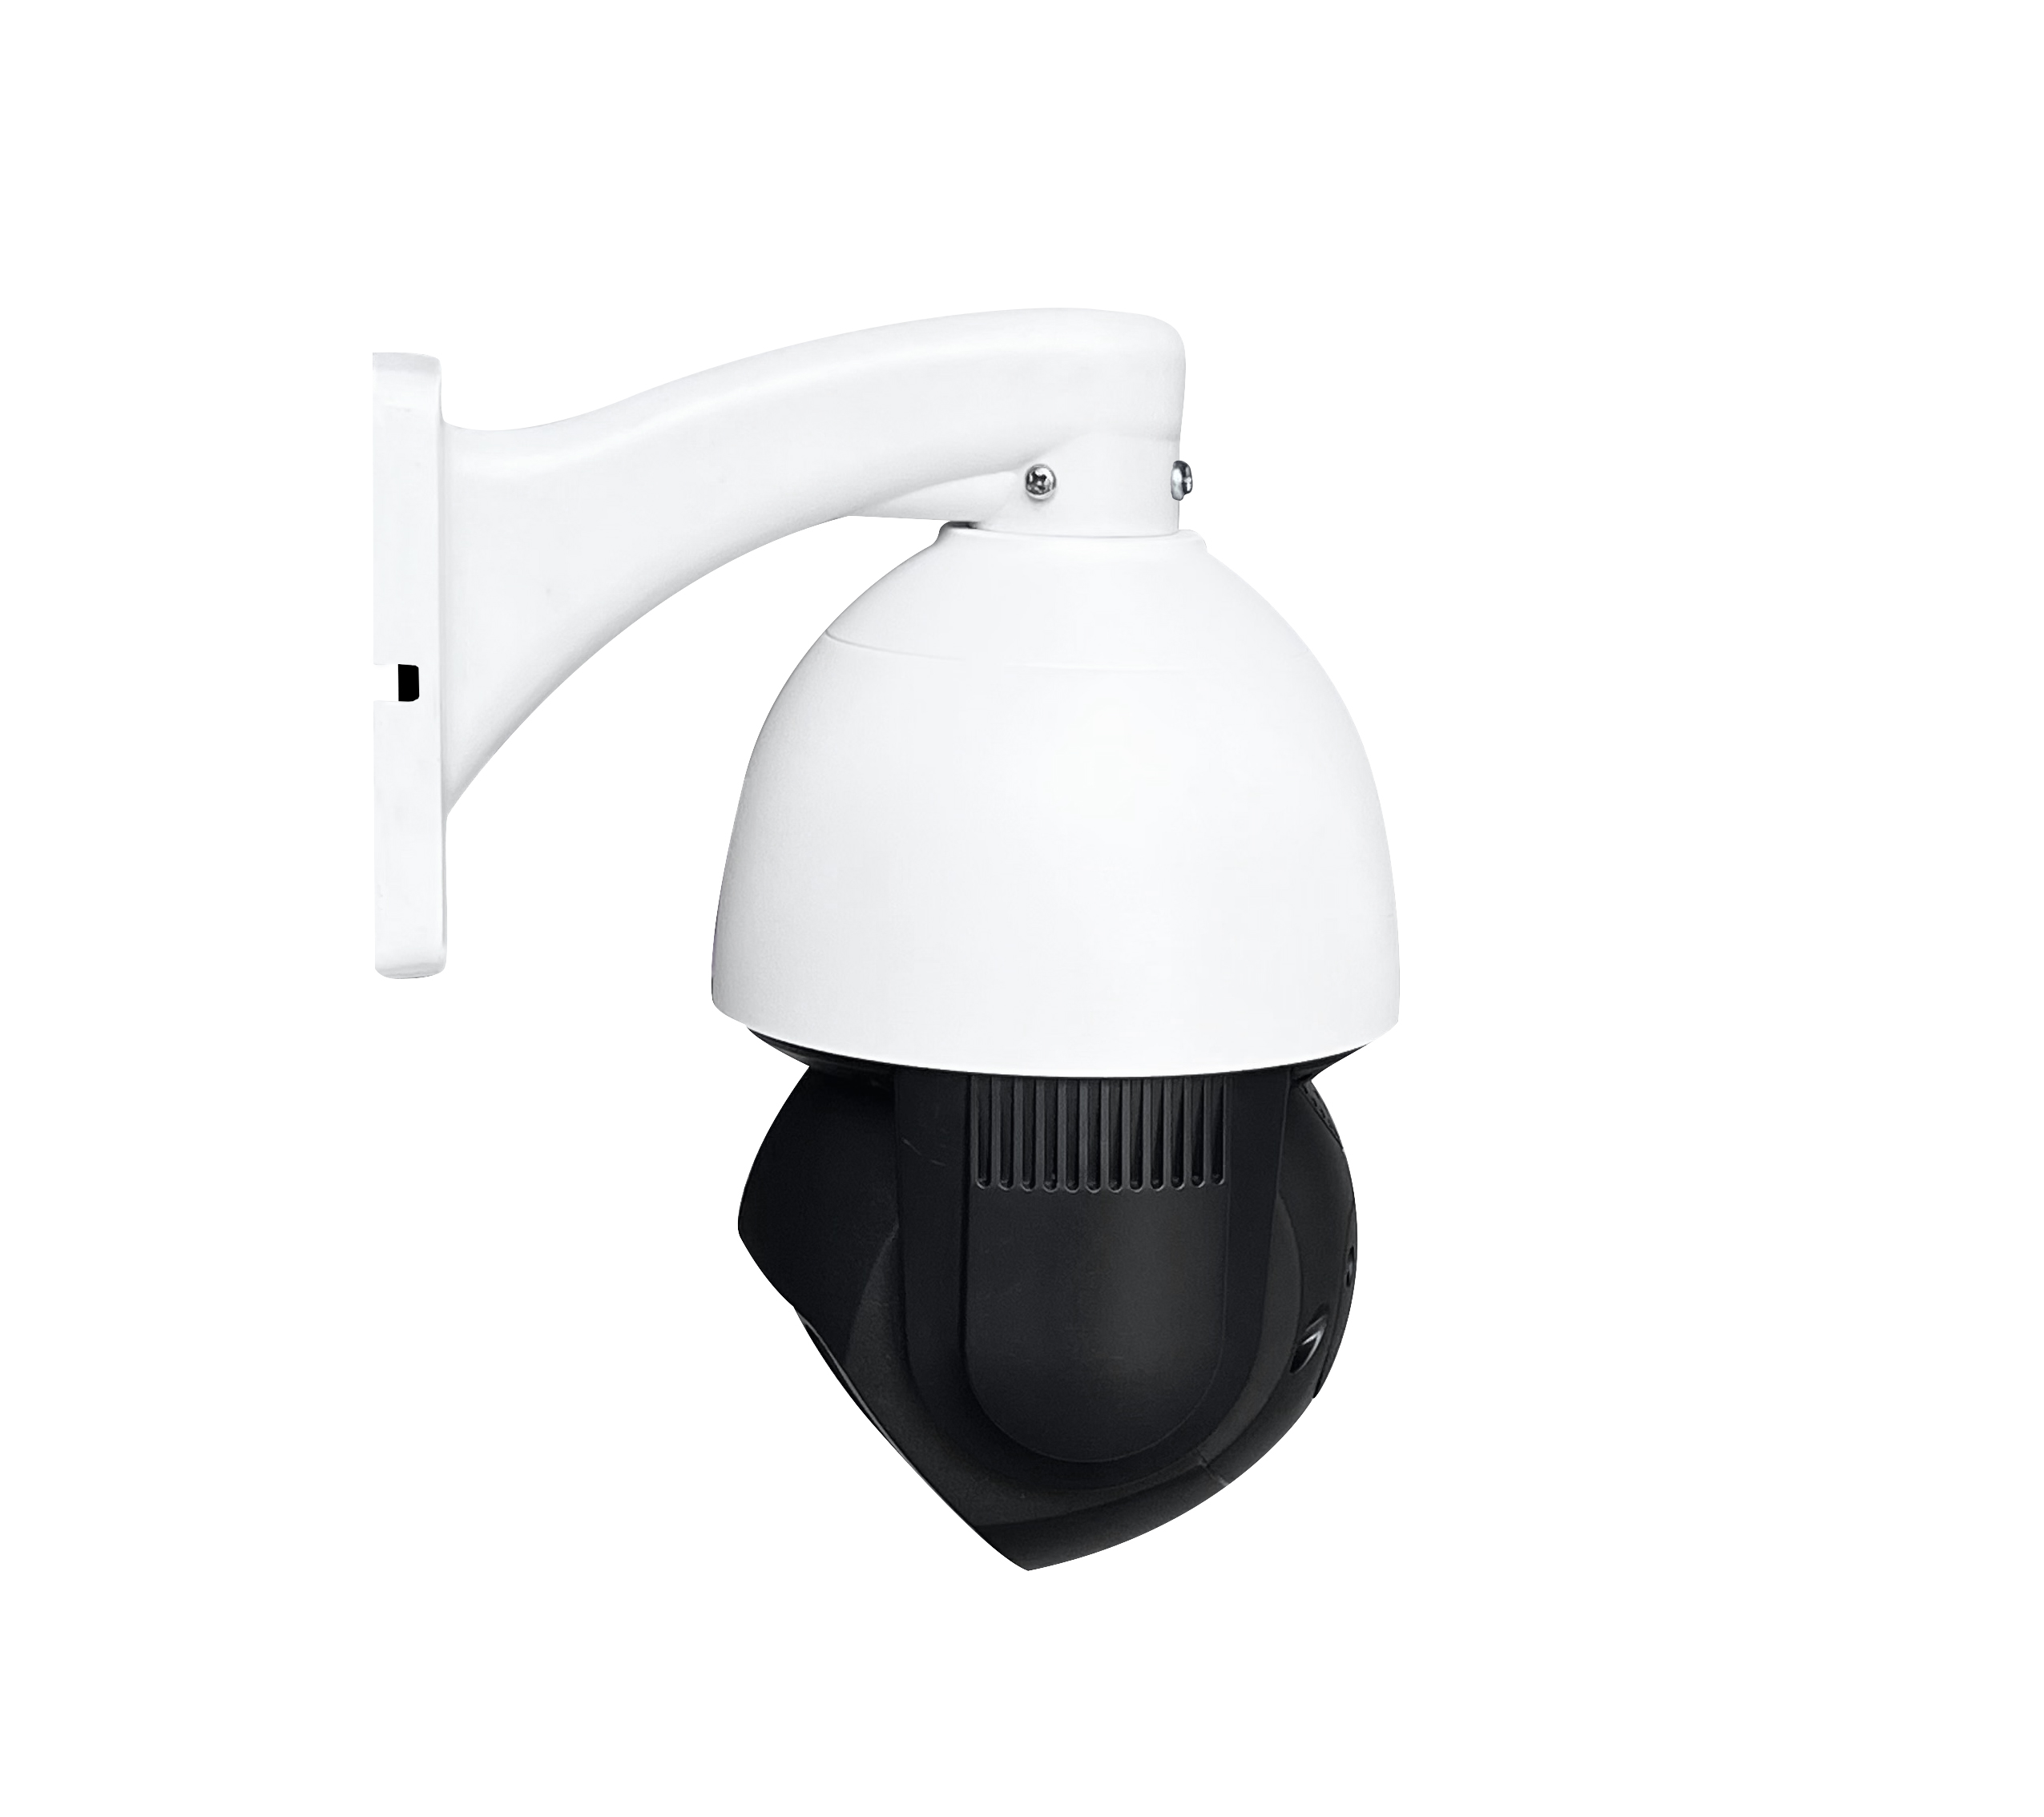 Microseven Open Source 6MP (3072x2048) Full Color Night Vision UltraHD PoE+ 20X Optical Zoom Pan Tilt Speed Dome IP Camera, Human & Vehicle Motion Detection & Auto Tracking, Indoor / Outdoor PTZ Camera, WDR, DNR, Sony CMOS, IP66 Weatherproof, Built-in 256GB SDcard Slot, Two-Way Audio, Auto Cruise, Web GUI & Apps, VMS (Video Management System),  Cloud Storage + Broadcasting on YouTube, Facebook & Microseven.tv